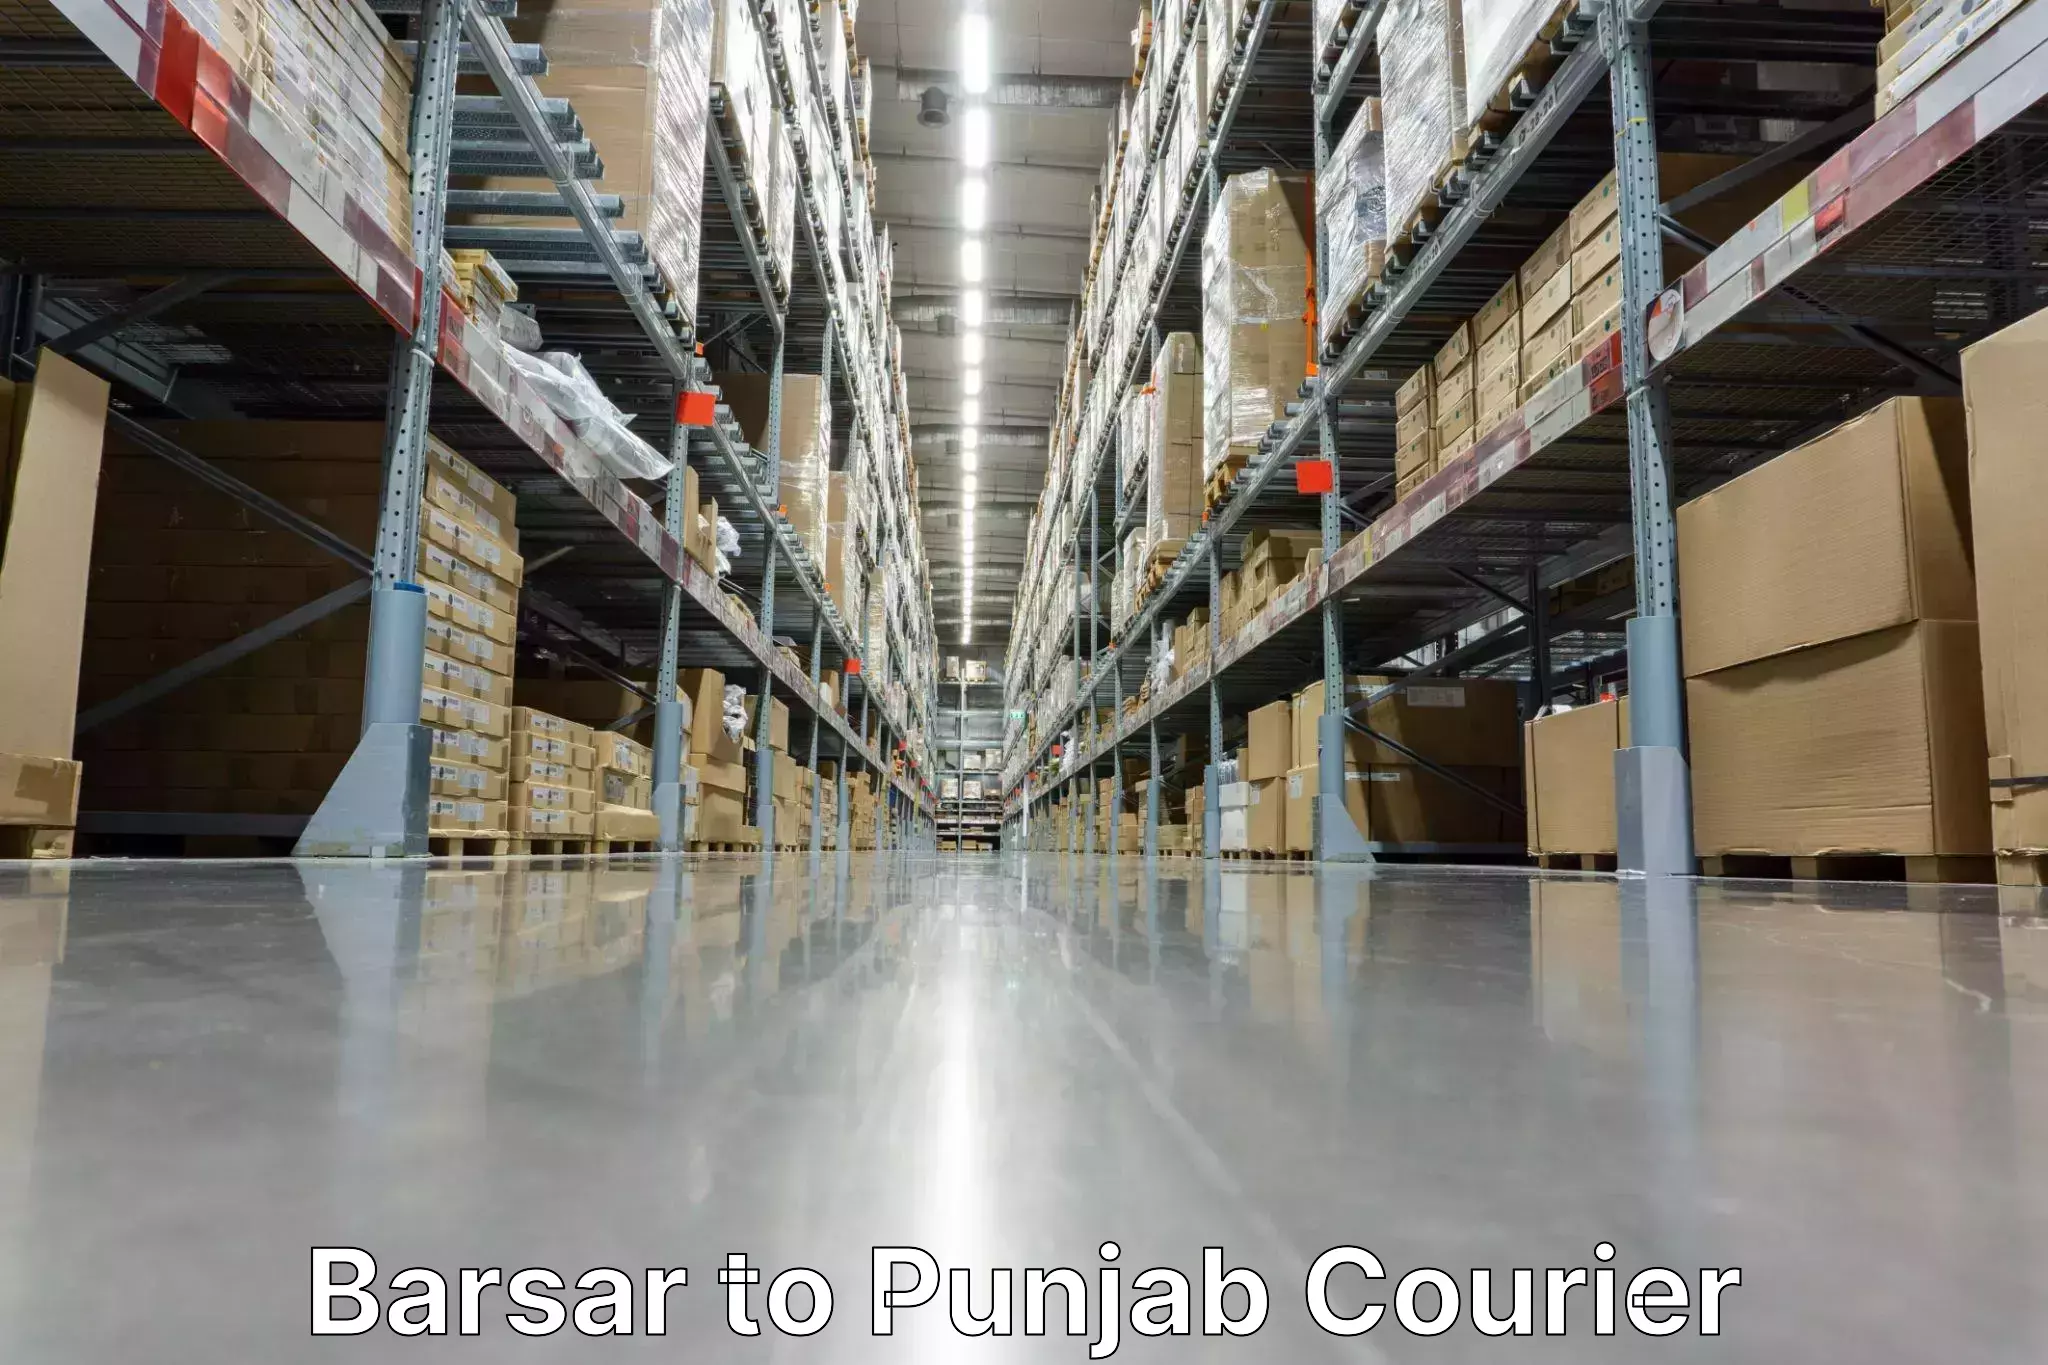 Express delivery capabilities in Barsar to Central University of Punjab Bathinda